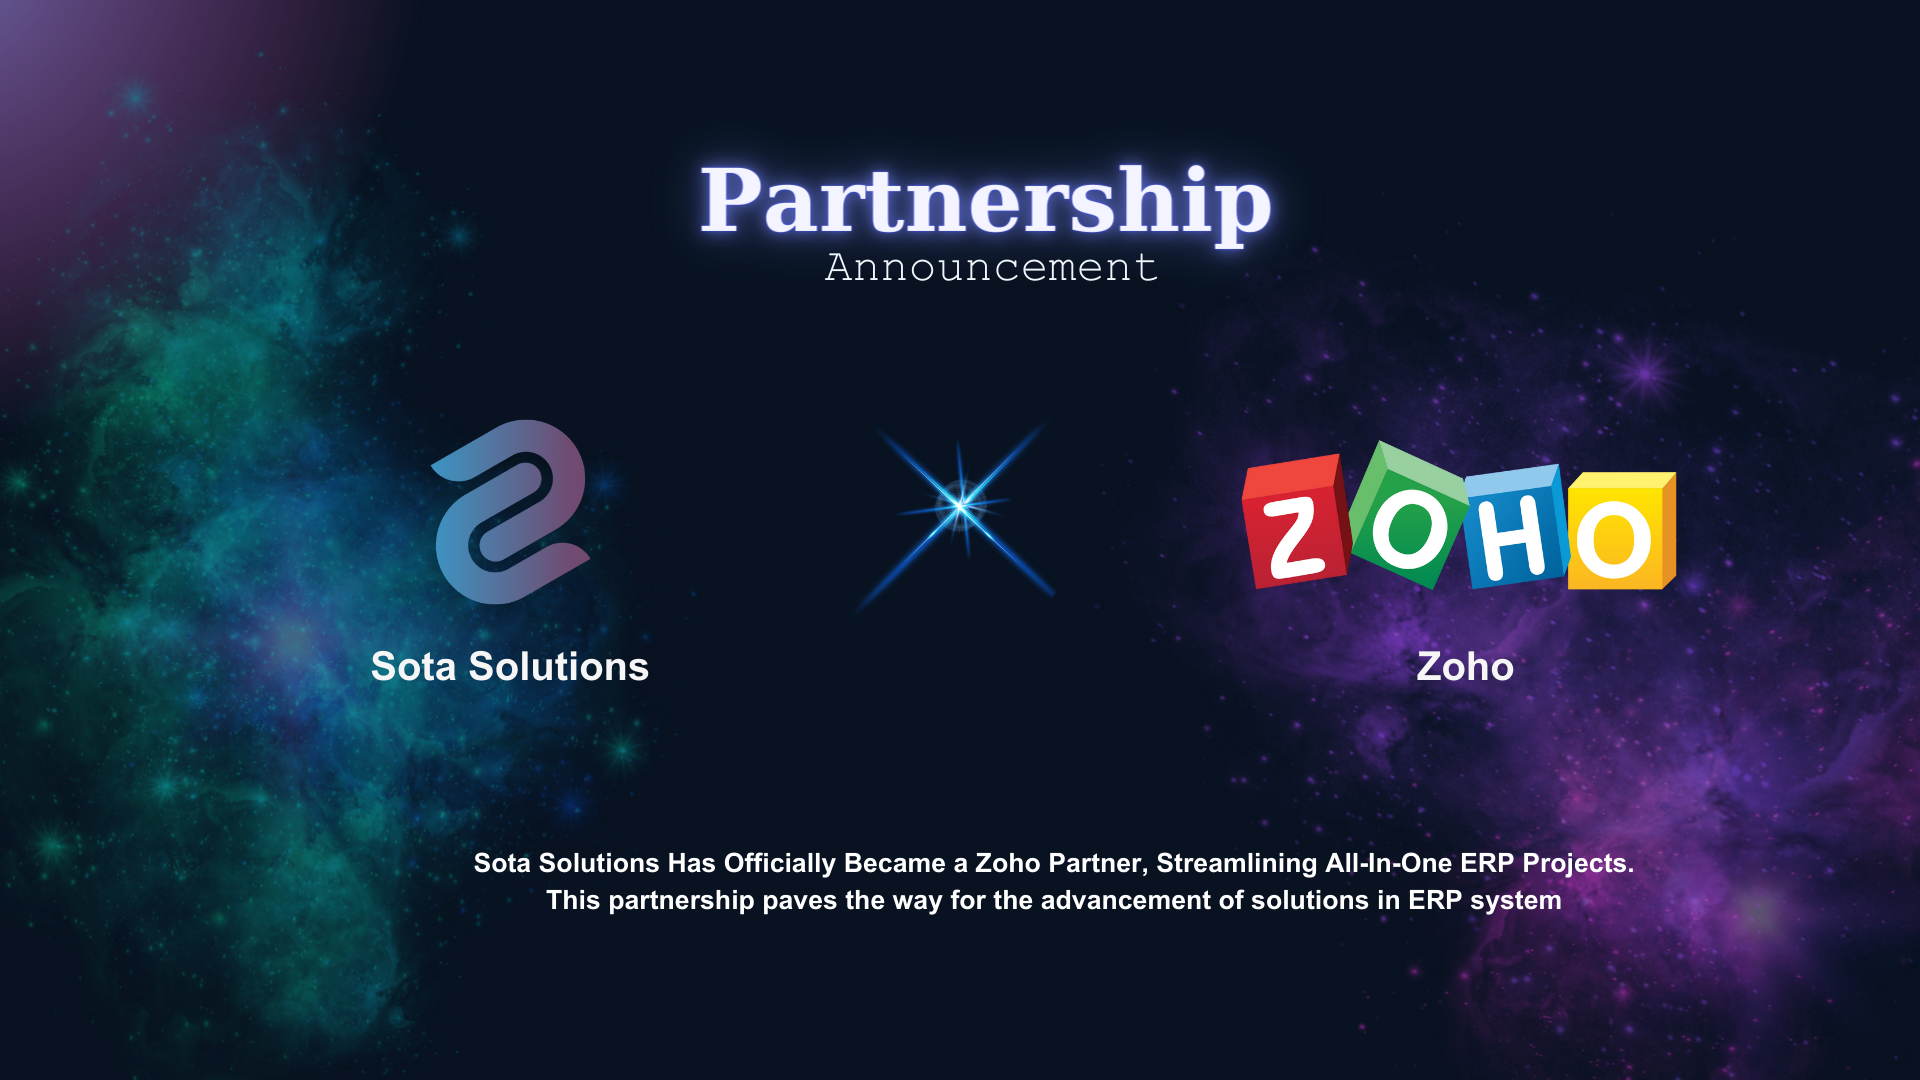 Sota Solutions partner with Zoho